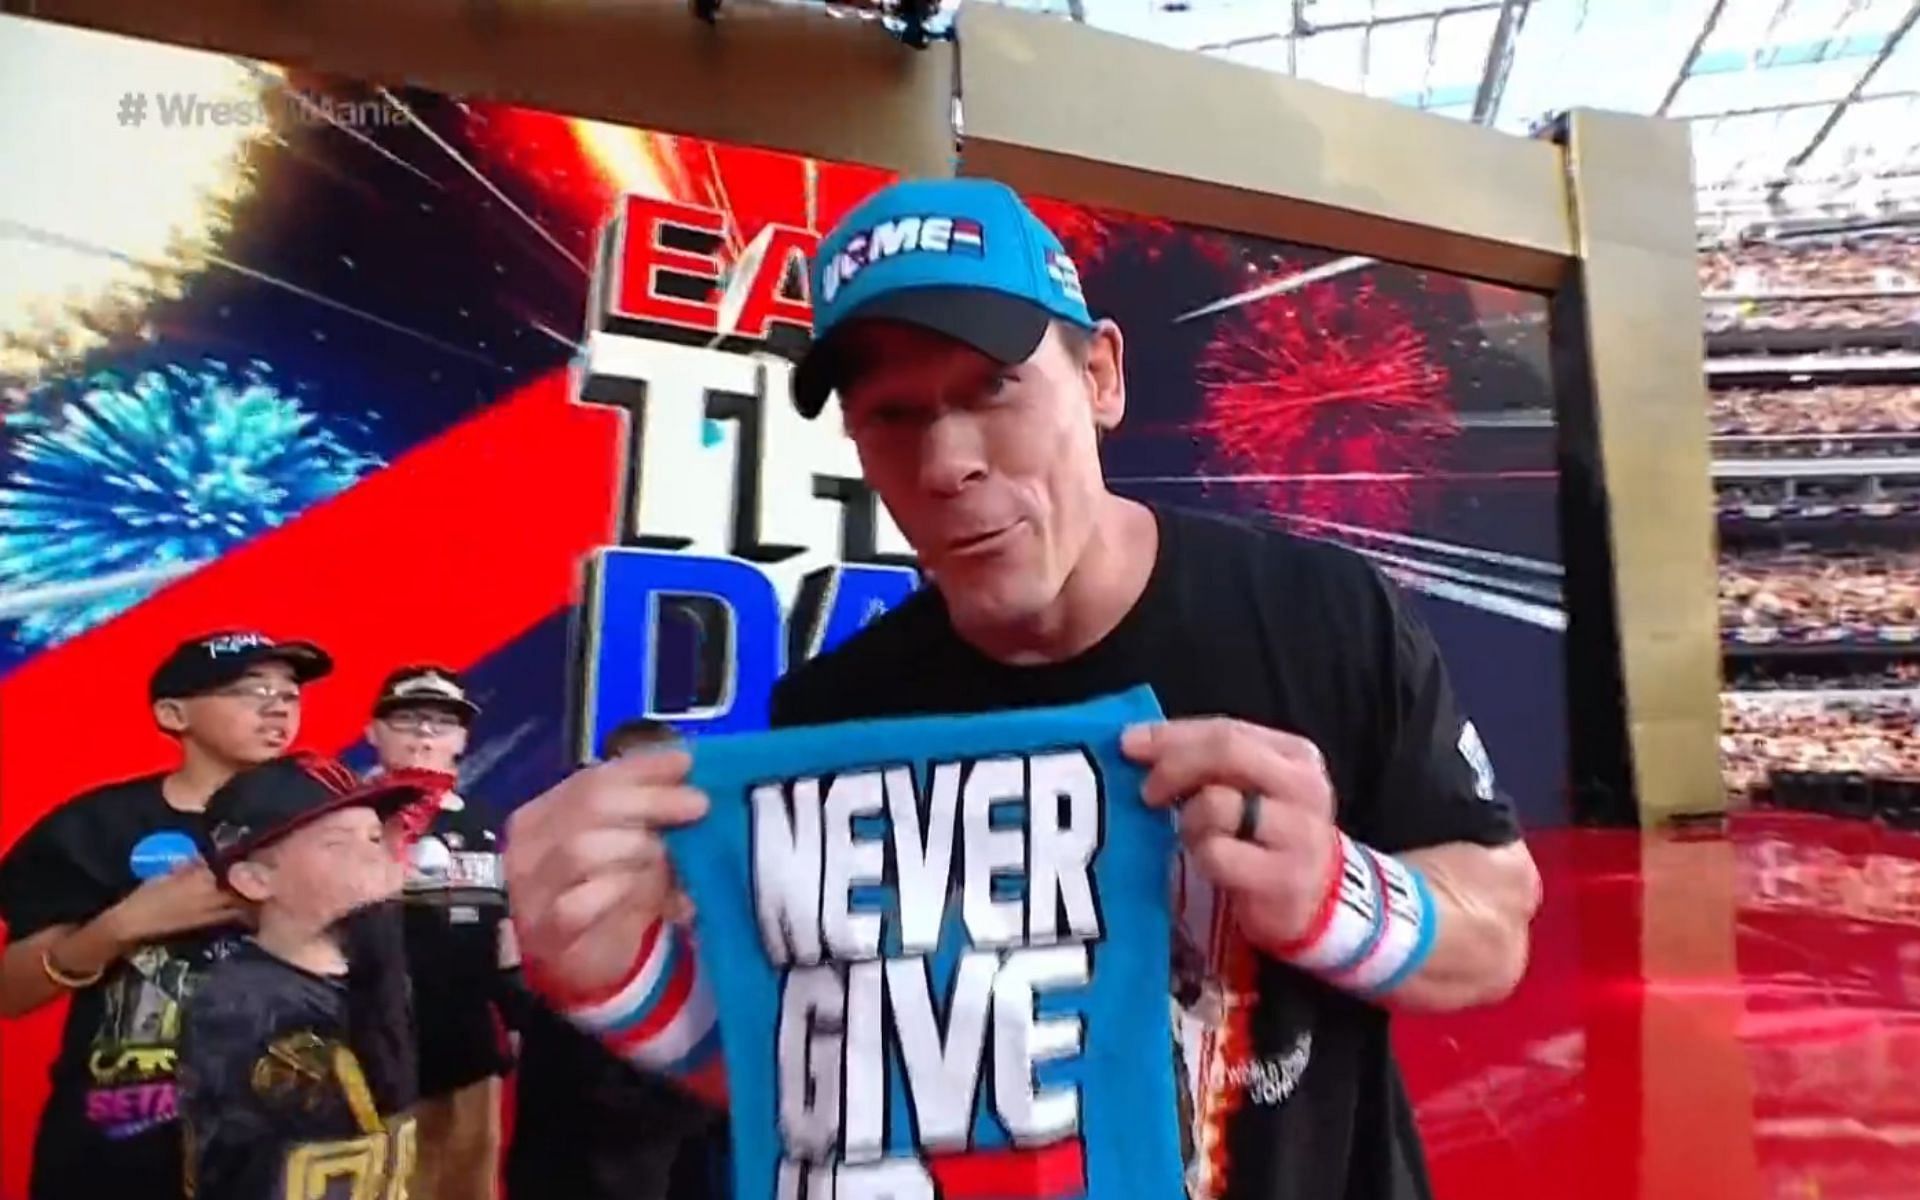 The leader of the Cenation had one of his least memorable WrestleMania performances